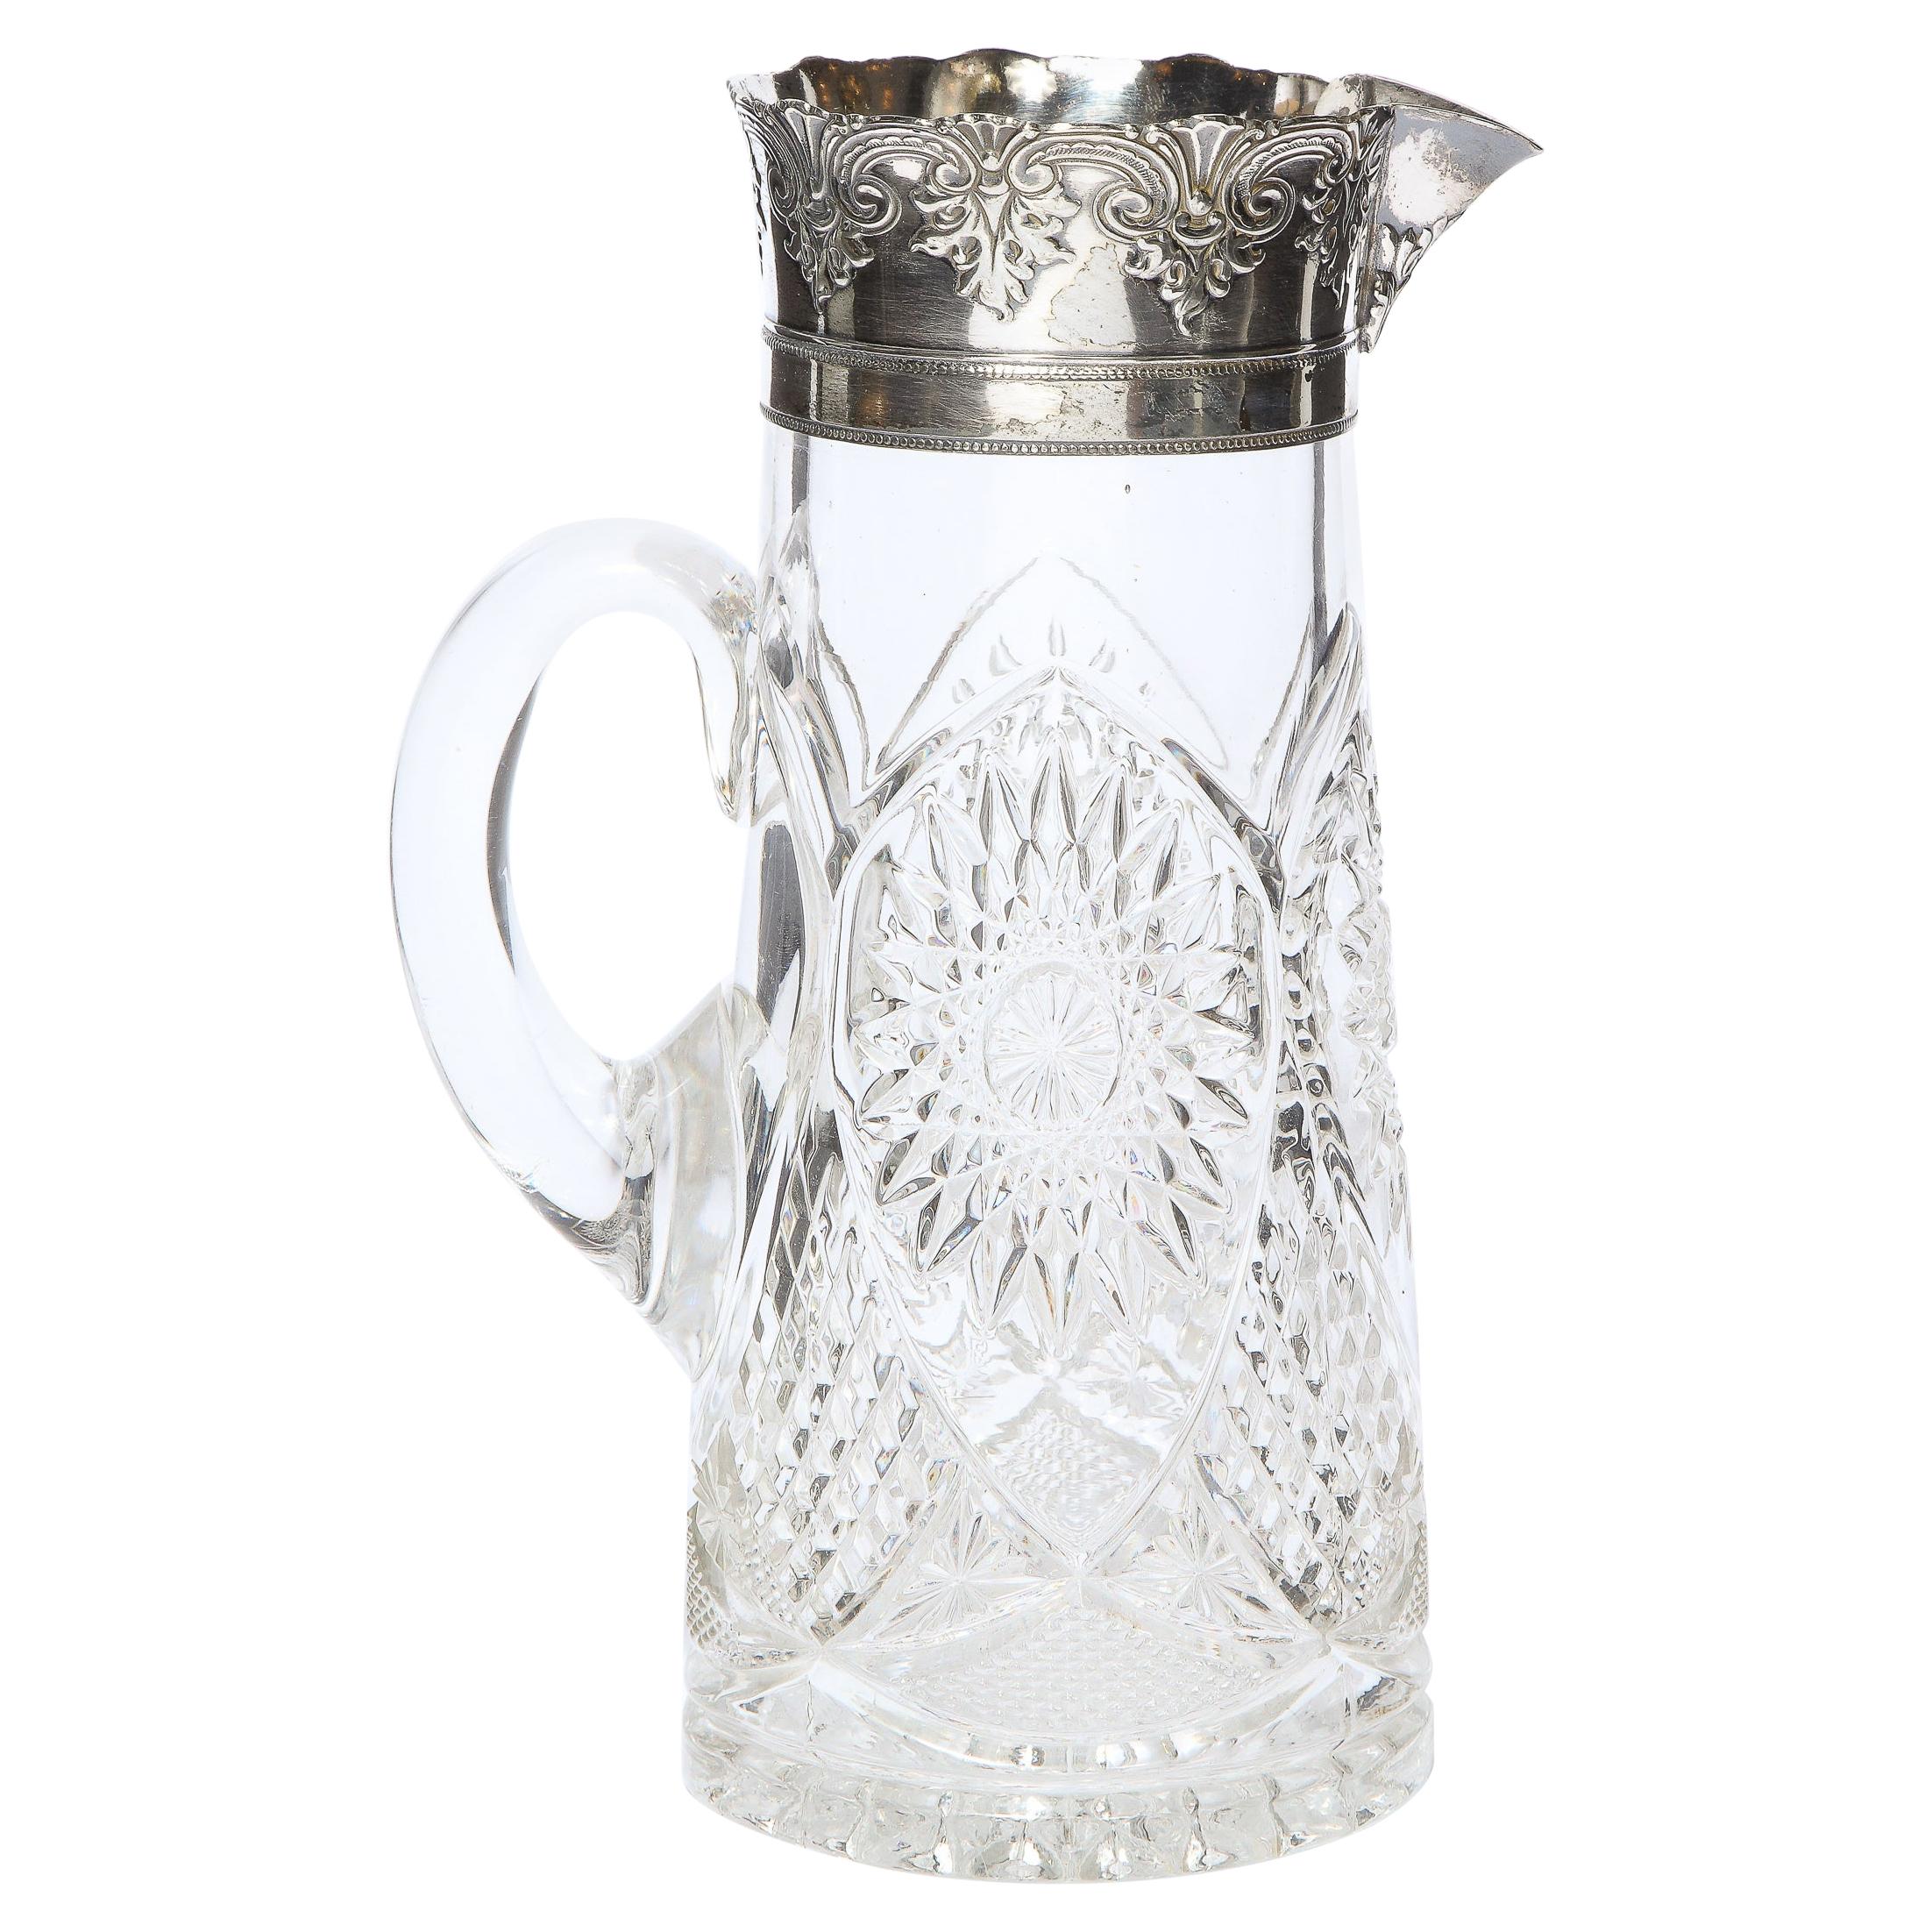 1940s Art Deco Pressed Glass Pitcher with Geometric Details & Silver Plated Top